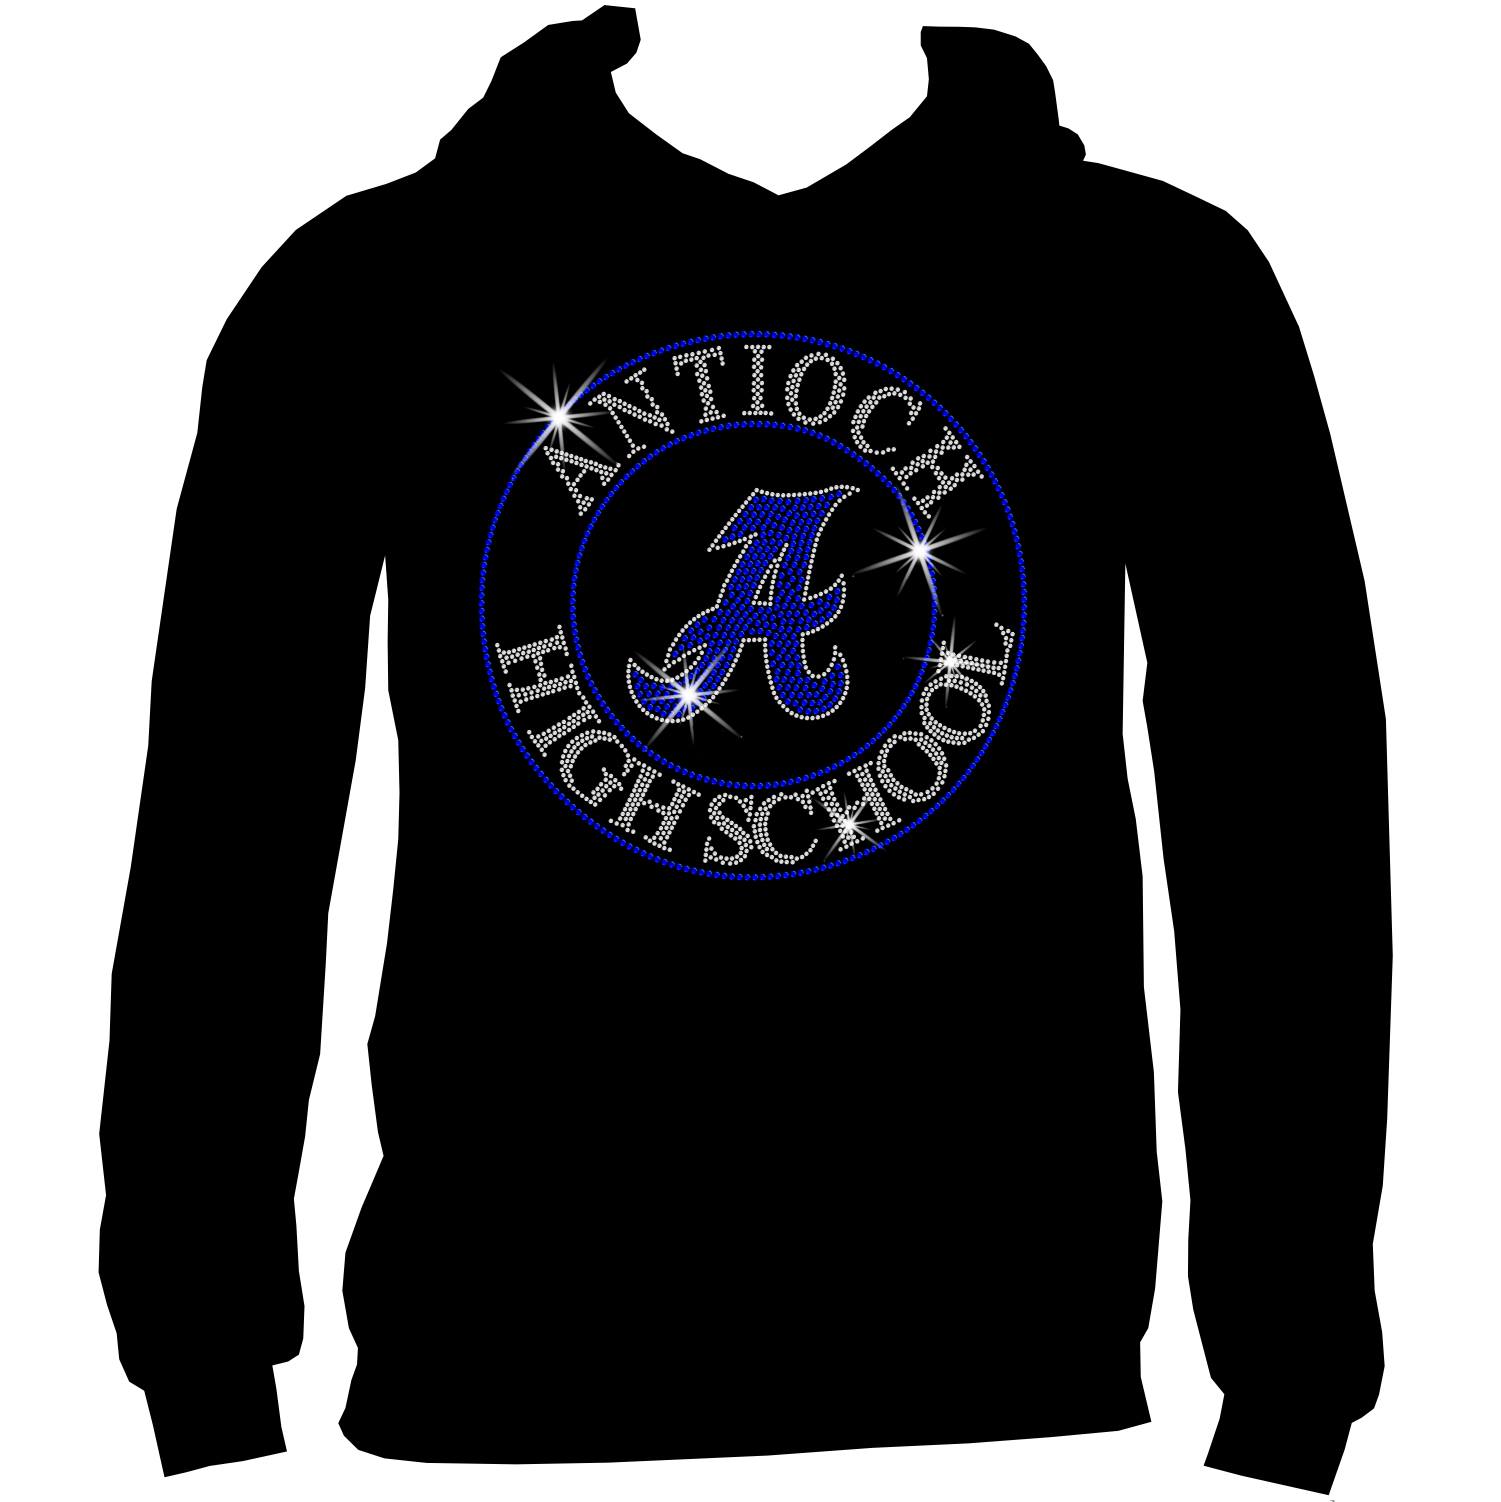 Antioch High School Holographic Spangle Sparkle Bling Shirt, tank or hoodie-LS Shirt, SS Shirt, Racerback tank and hoodie-Becky's Boutique-S-Adult Hoodie Sweatshirt-Black-Beckys-Boutique.com